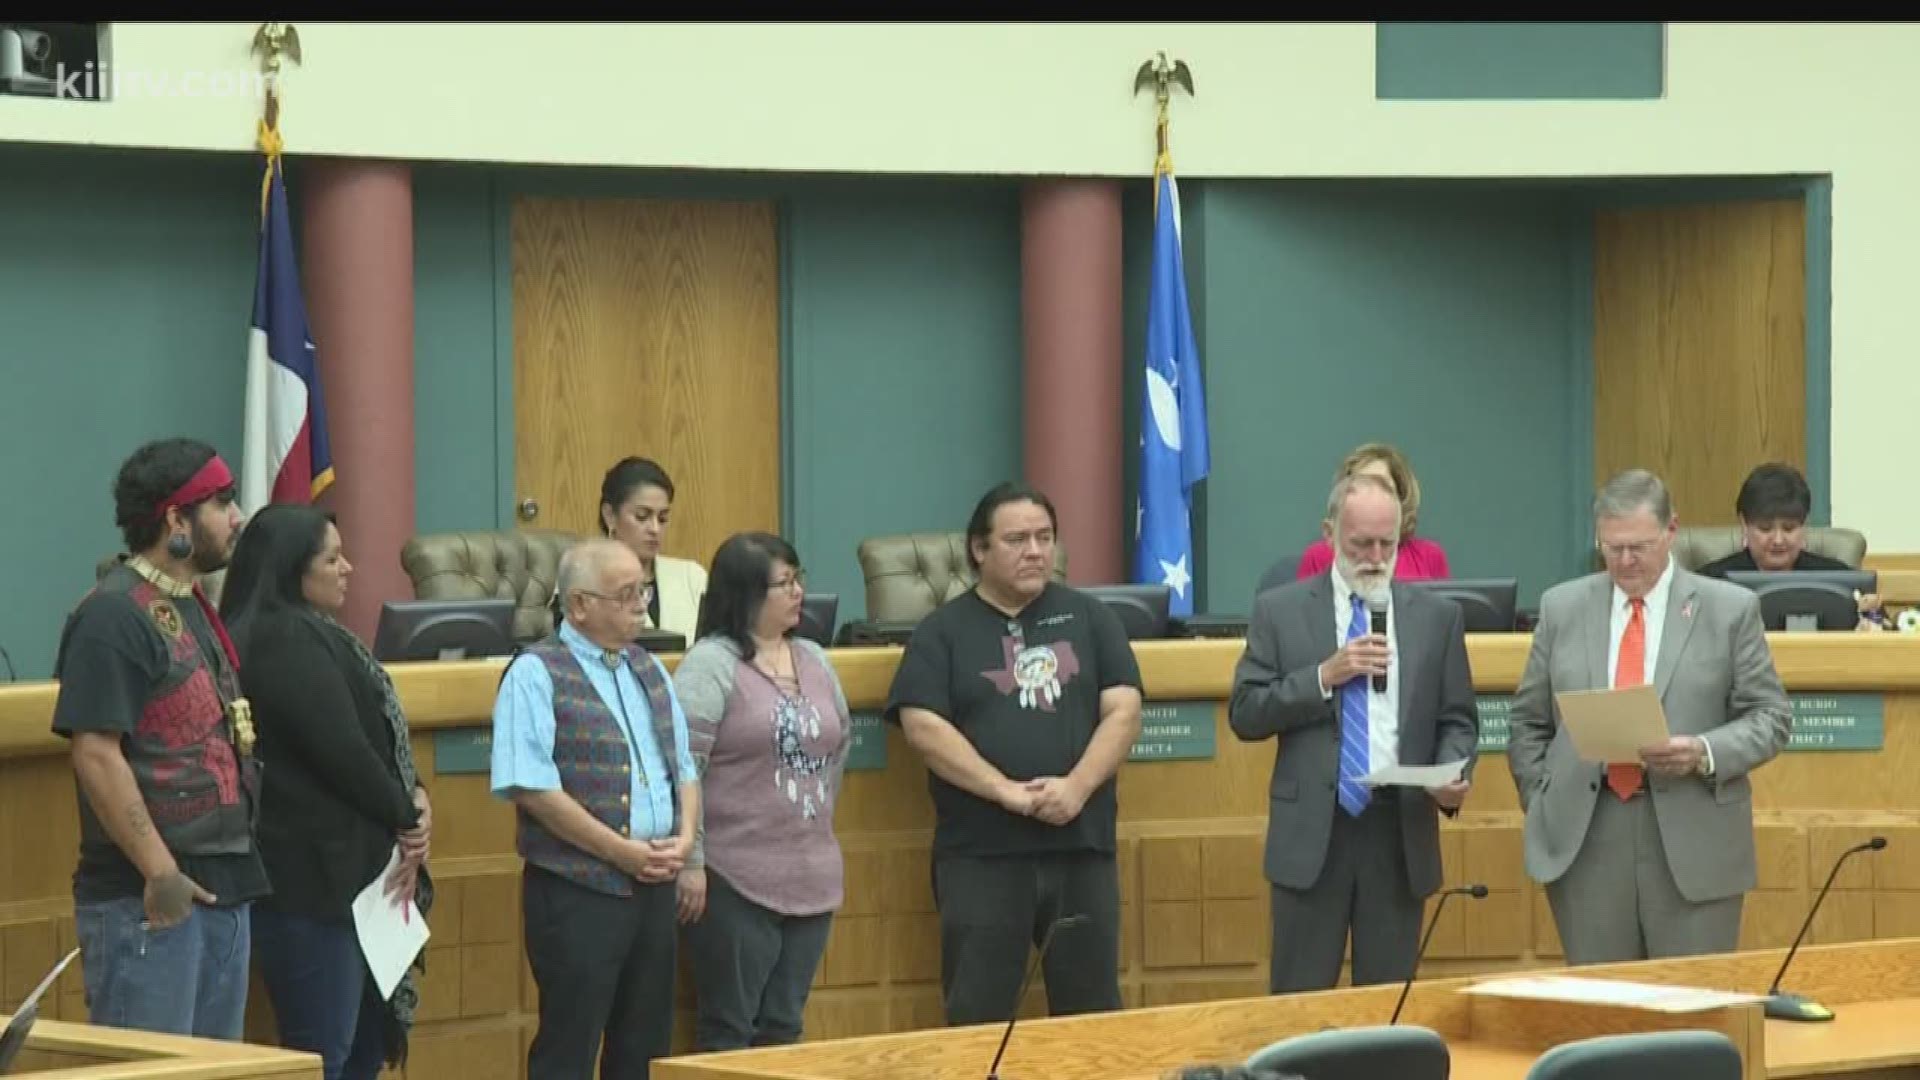 The city recognized forgotten American Indians who lived in the Coastal Bend.